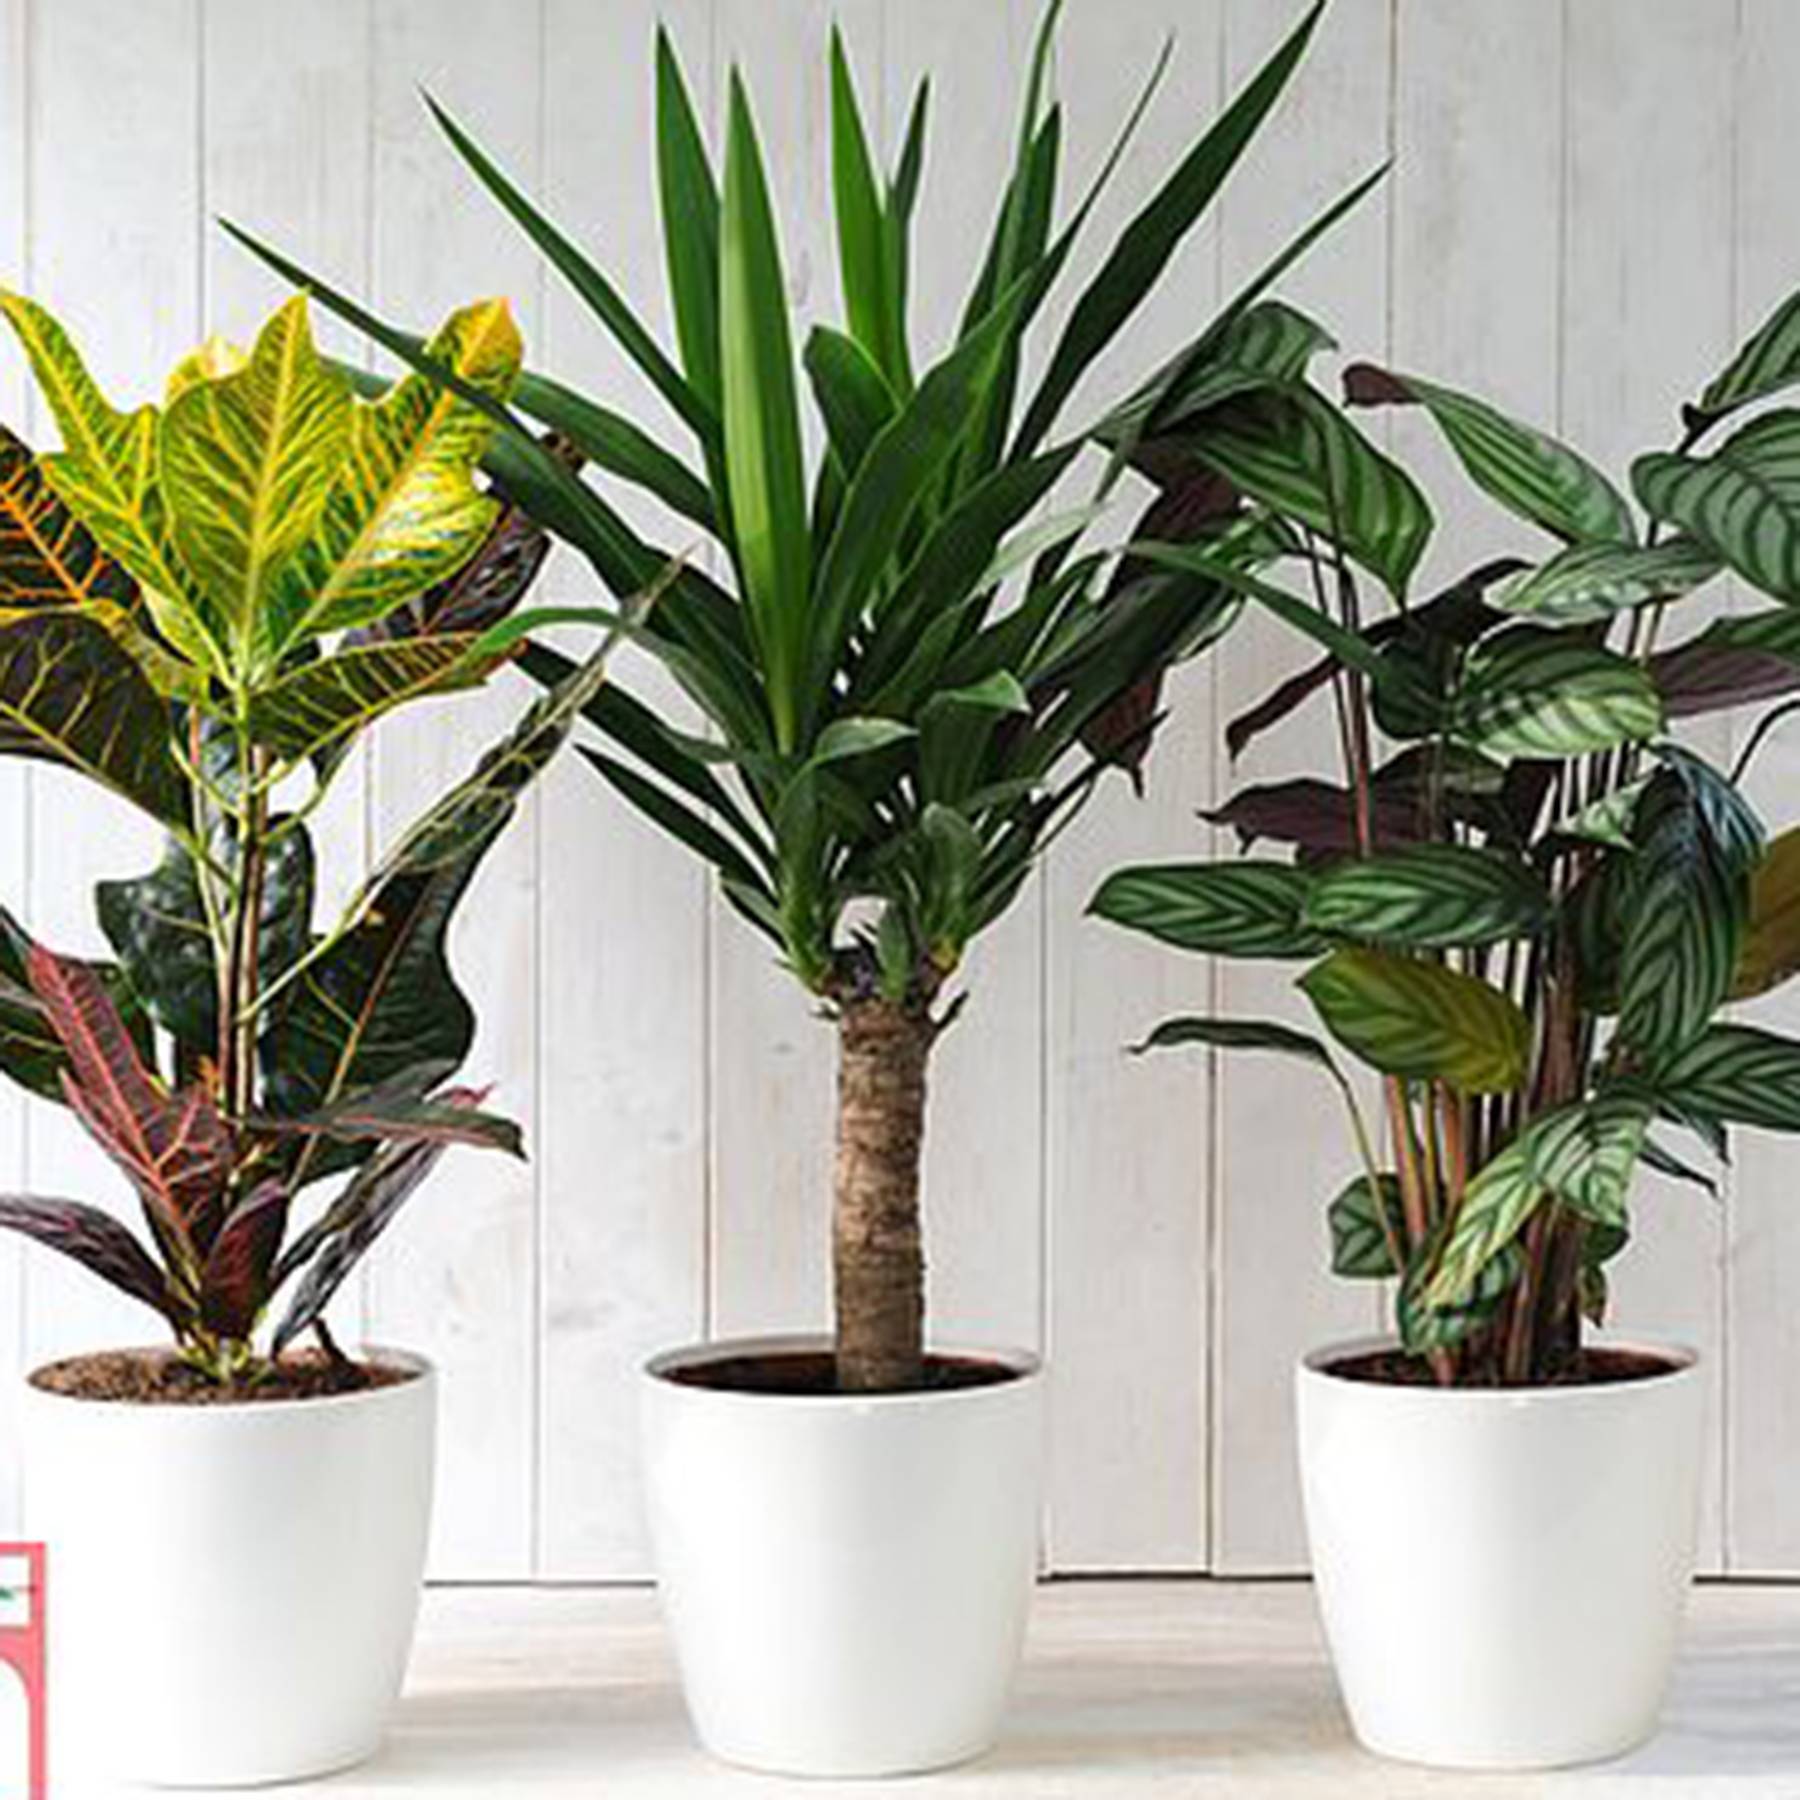 25 Best Indoor Plants LowMaintenance House Plants for Your Home